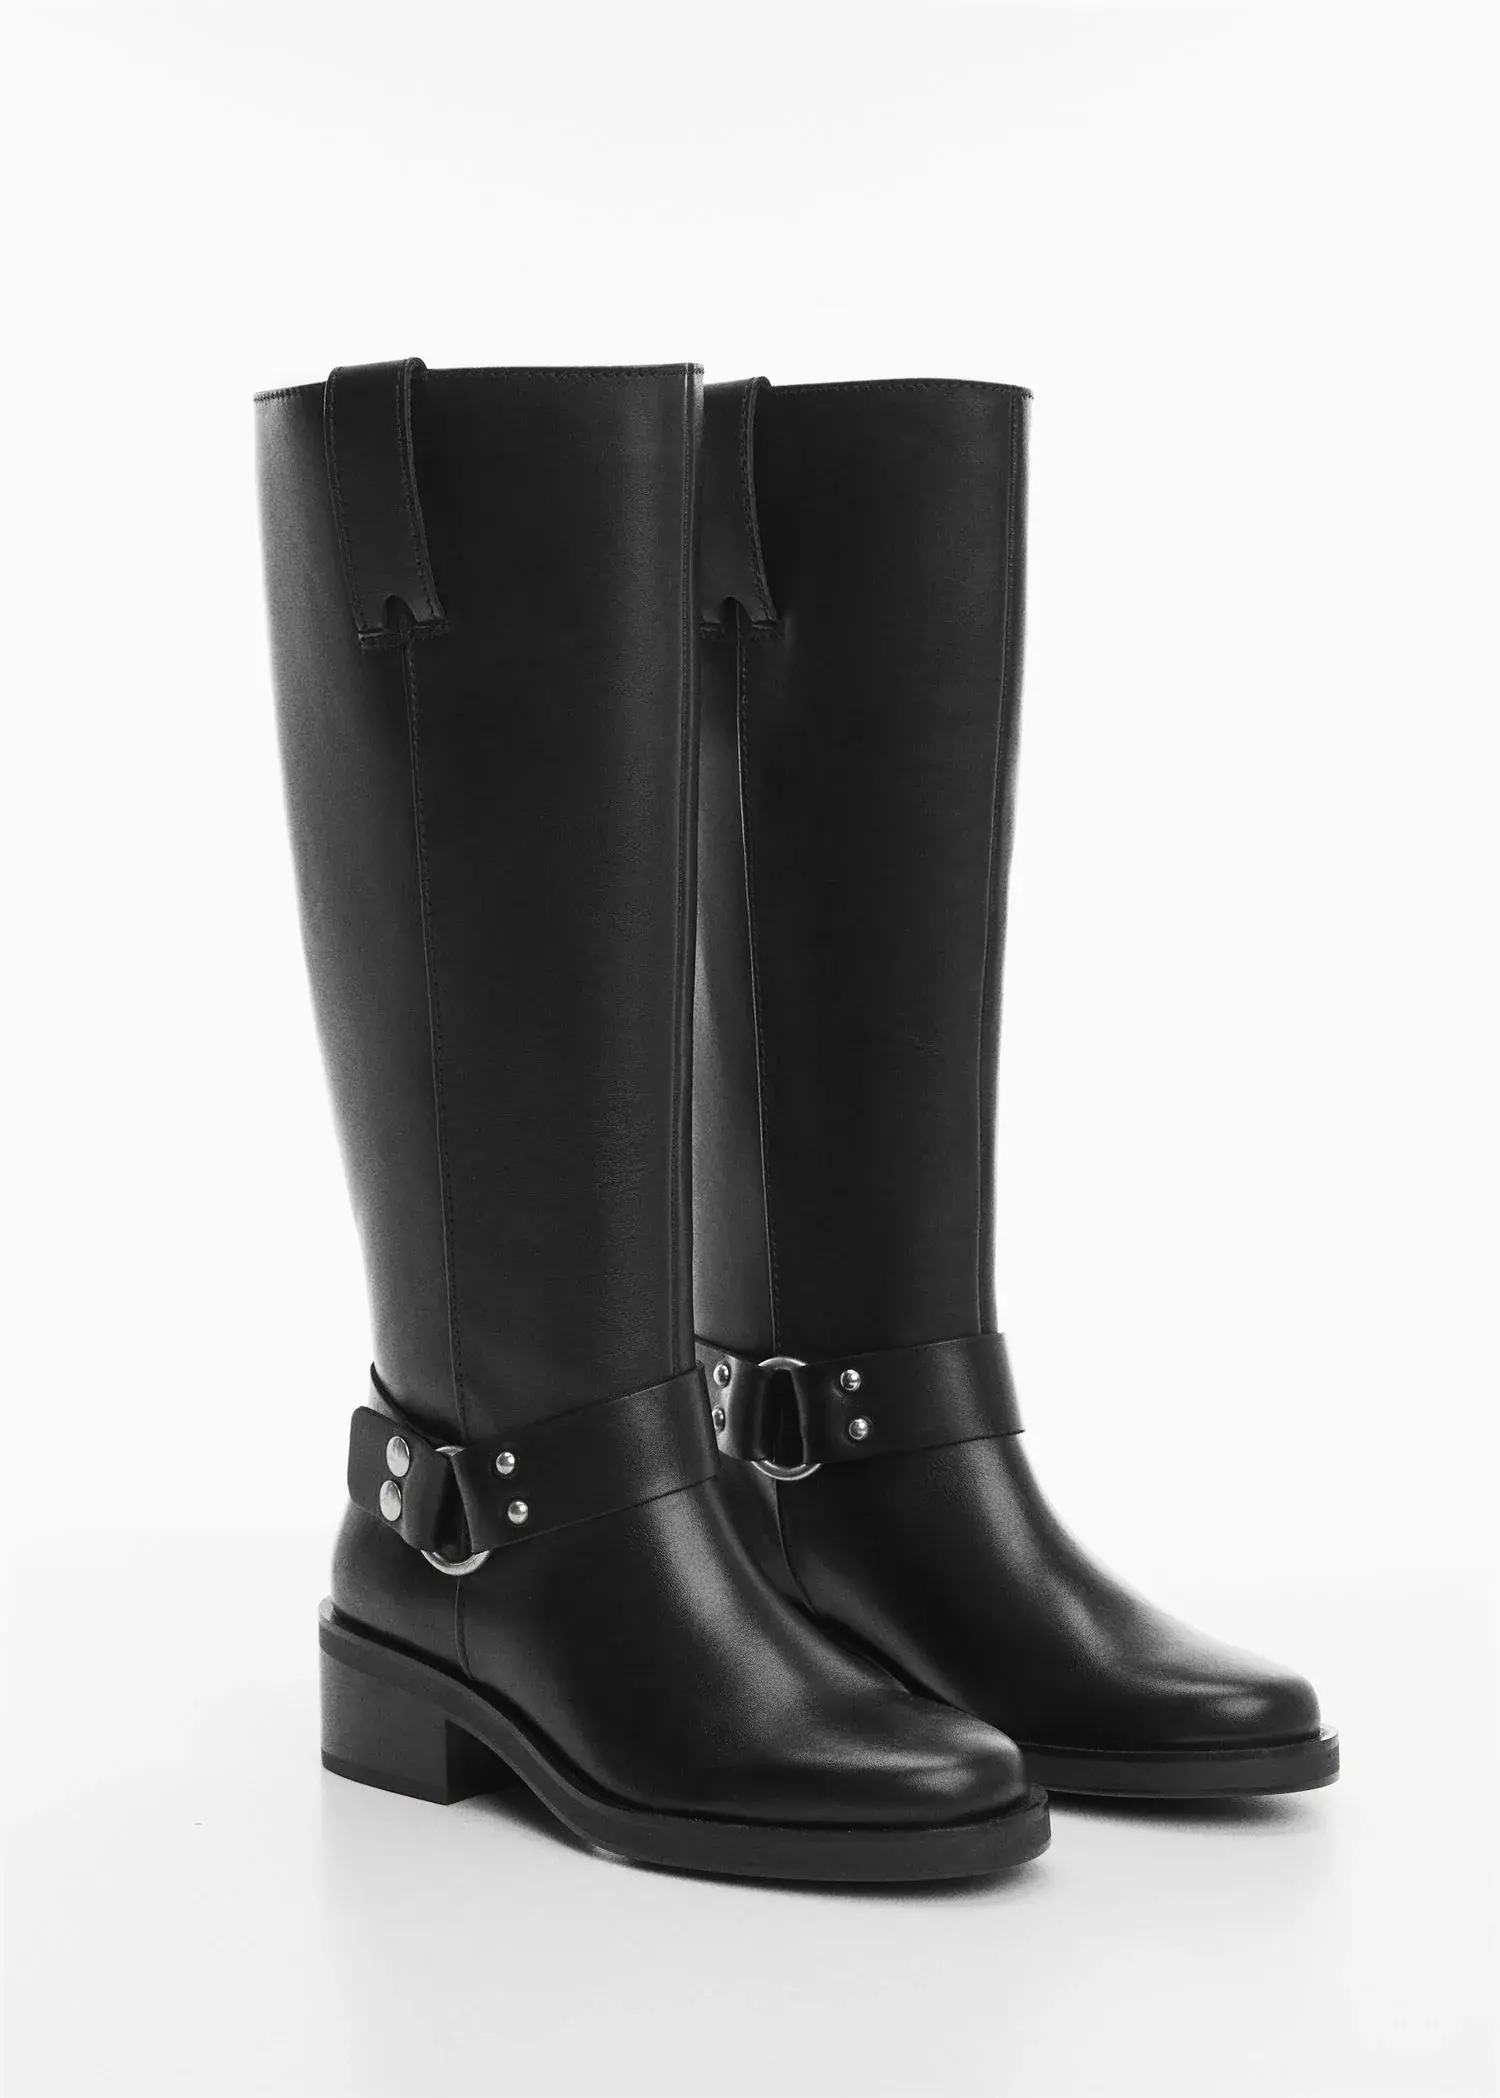 Mango Buckles leather boots. 2